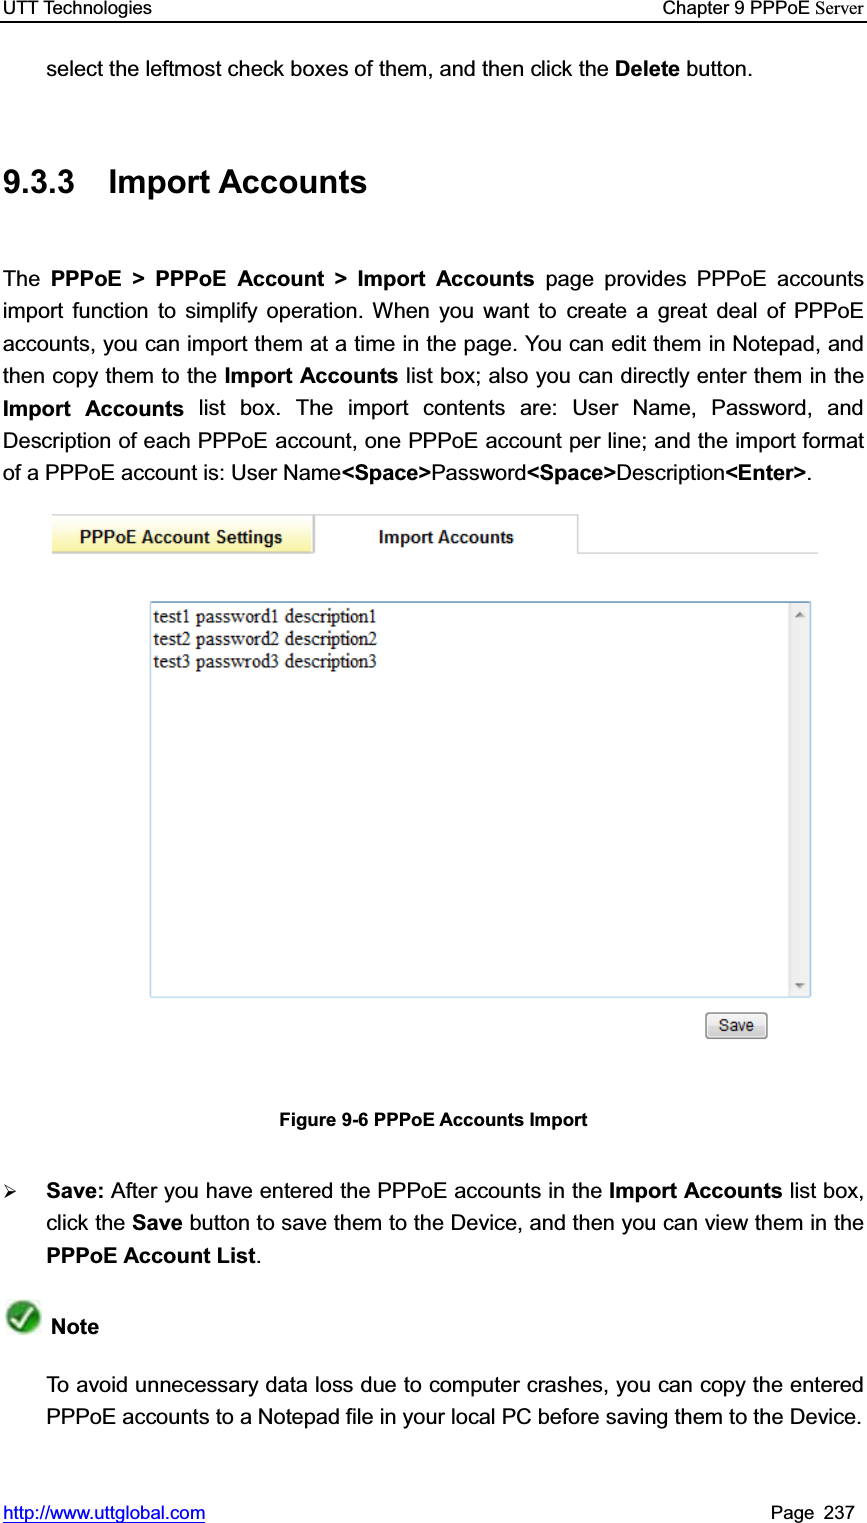 UTT Technologies    Chapter 9 PPPoE Serverhttp://www.uttglobal.com Page 237 select the leftmost check boxes of them, and then click the Delete button. 9.3.3 Import Accounts The PPPoE &gt; PPPoE Account &gt; Import Accounts page provides PPPoE accounts import function to simplify operation. When you want to create a great deal of PPPoE accounts, you can import them at a time in the page. You can edit them in Notepad, andthen copy them to the Import Accounts list box; also you can directly enter them in the Import Accounts list box. The import contents are: User Name, Password, and Description of each PPPoE account, one PPPoE account per line; and the import format of a PPPoE account is: User Name&lt;Space&gt;Password&lt;Space&gt;Description&lt;Enter&gt;.Figure 9-6 PPPoE Accounts Import ¾Save: After you have entered the PPPoE accounts in the Import Accounts list box, click the Save button to save them to the Device, and then you can view them in thePPPoE Account List.NoteTo avoid unnecessary data loss due to computer crashes, you can copy the entered PPPoE accounts to a Notepad file in your local PC before saving them to the Device. 